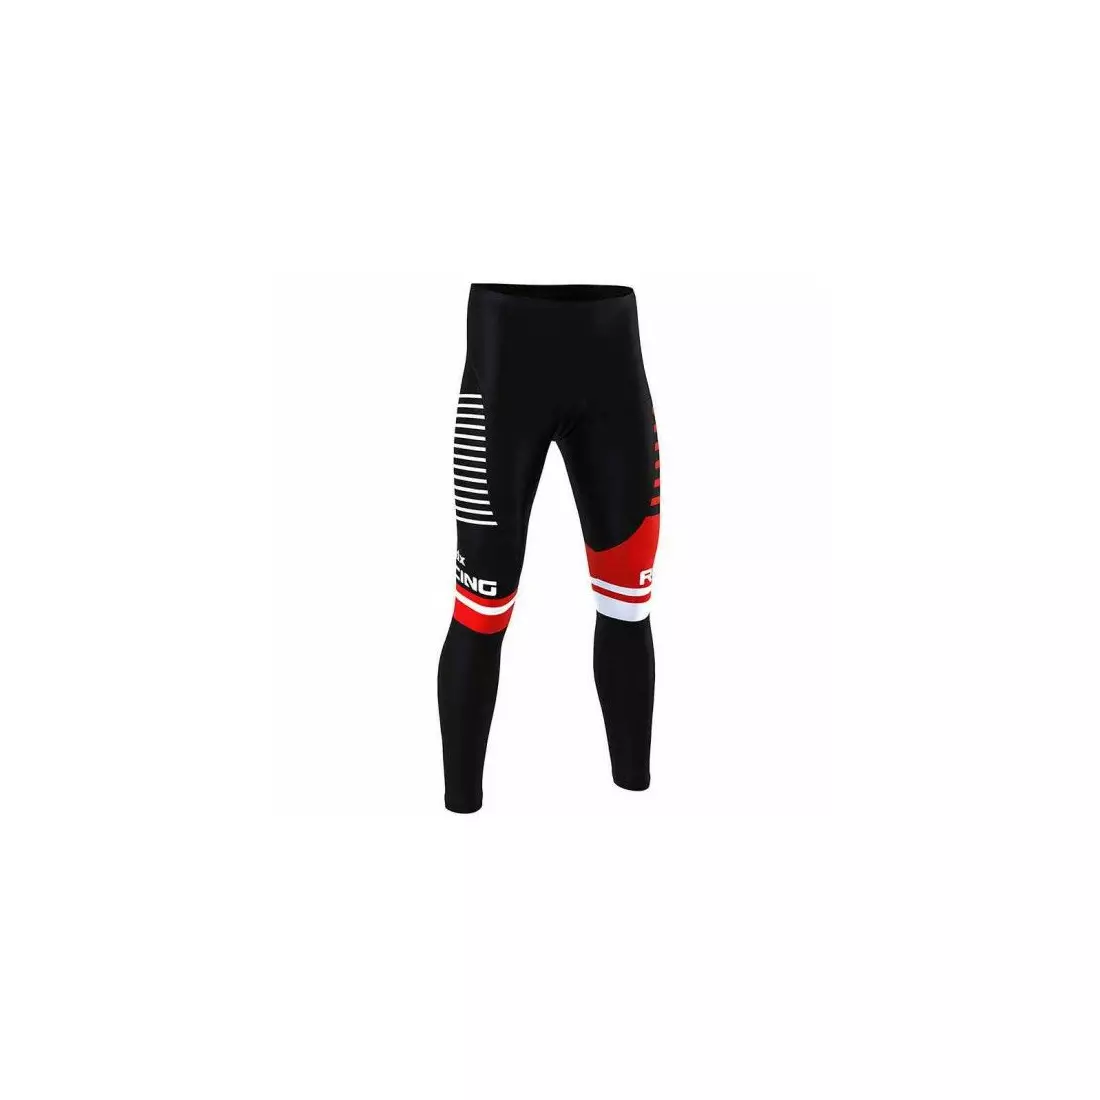 FDX 1800 insulated cycling pants for a bicycle, black-red